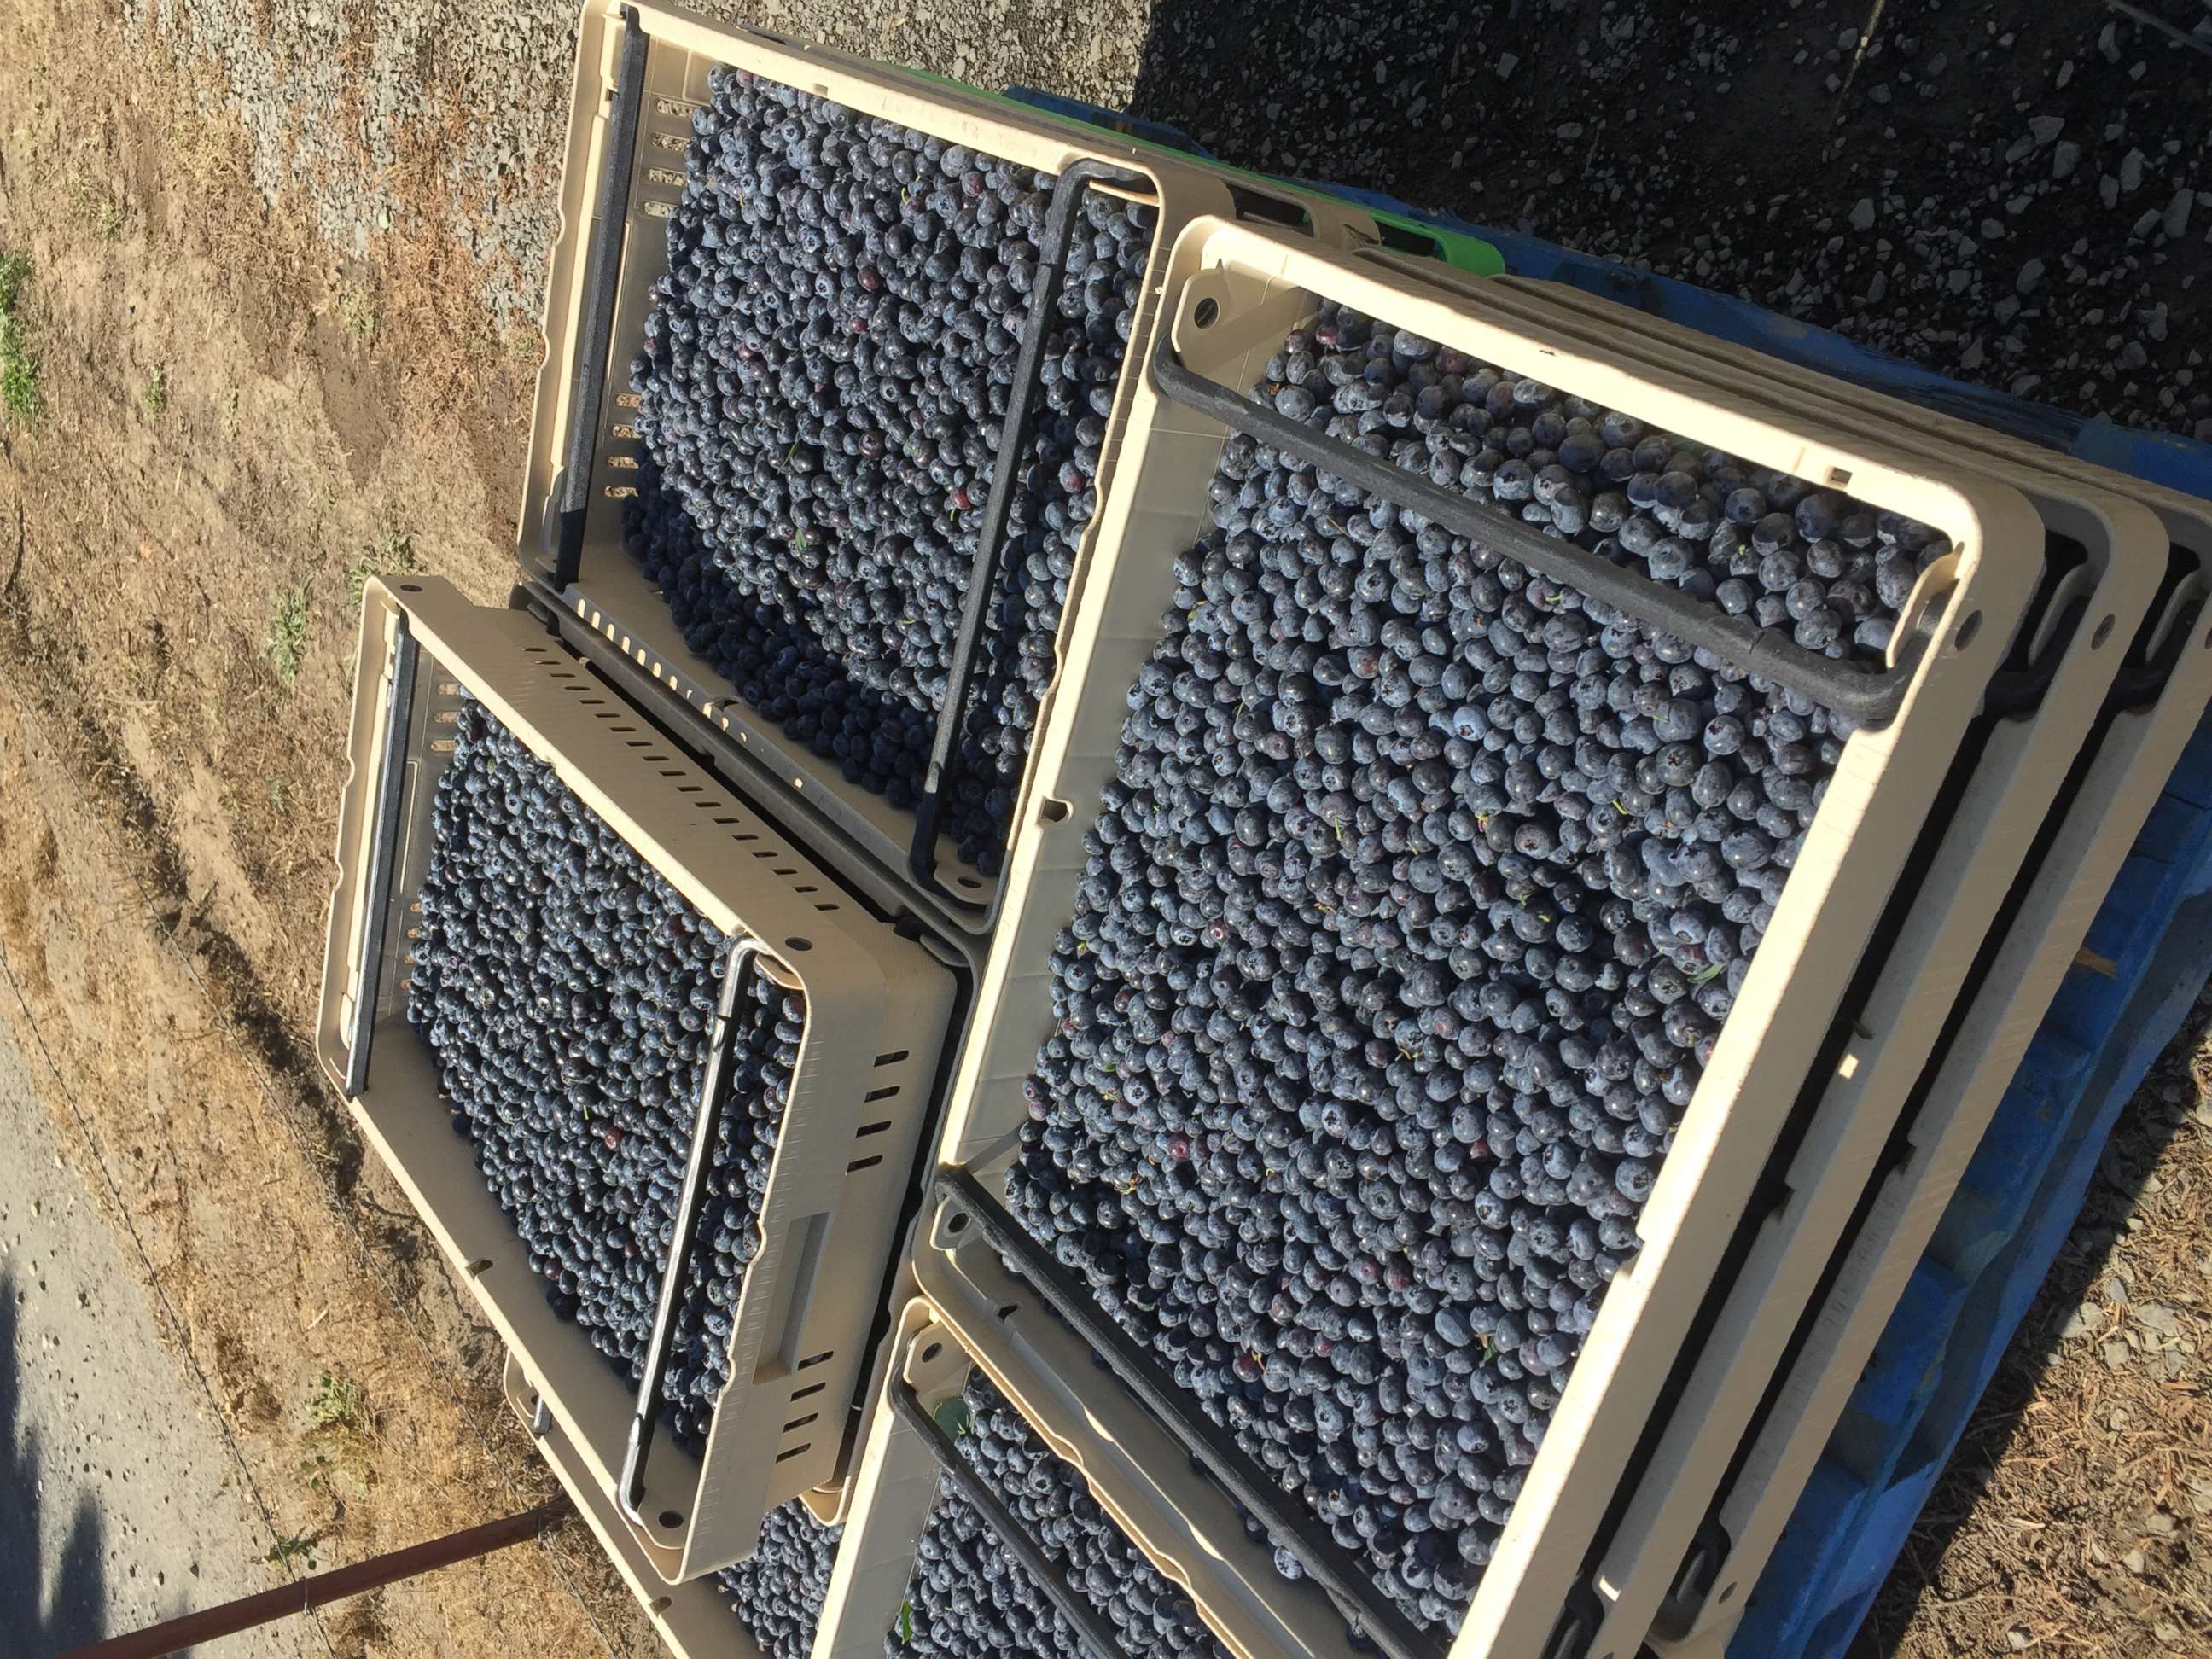 PHOTO: Pallets of blueberries harvested from a farm in Washington. 